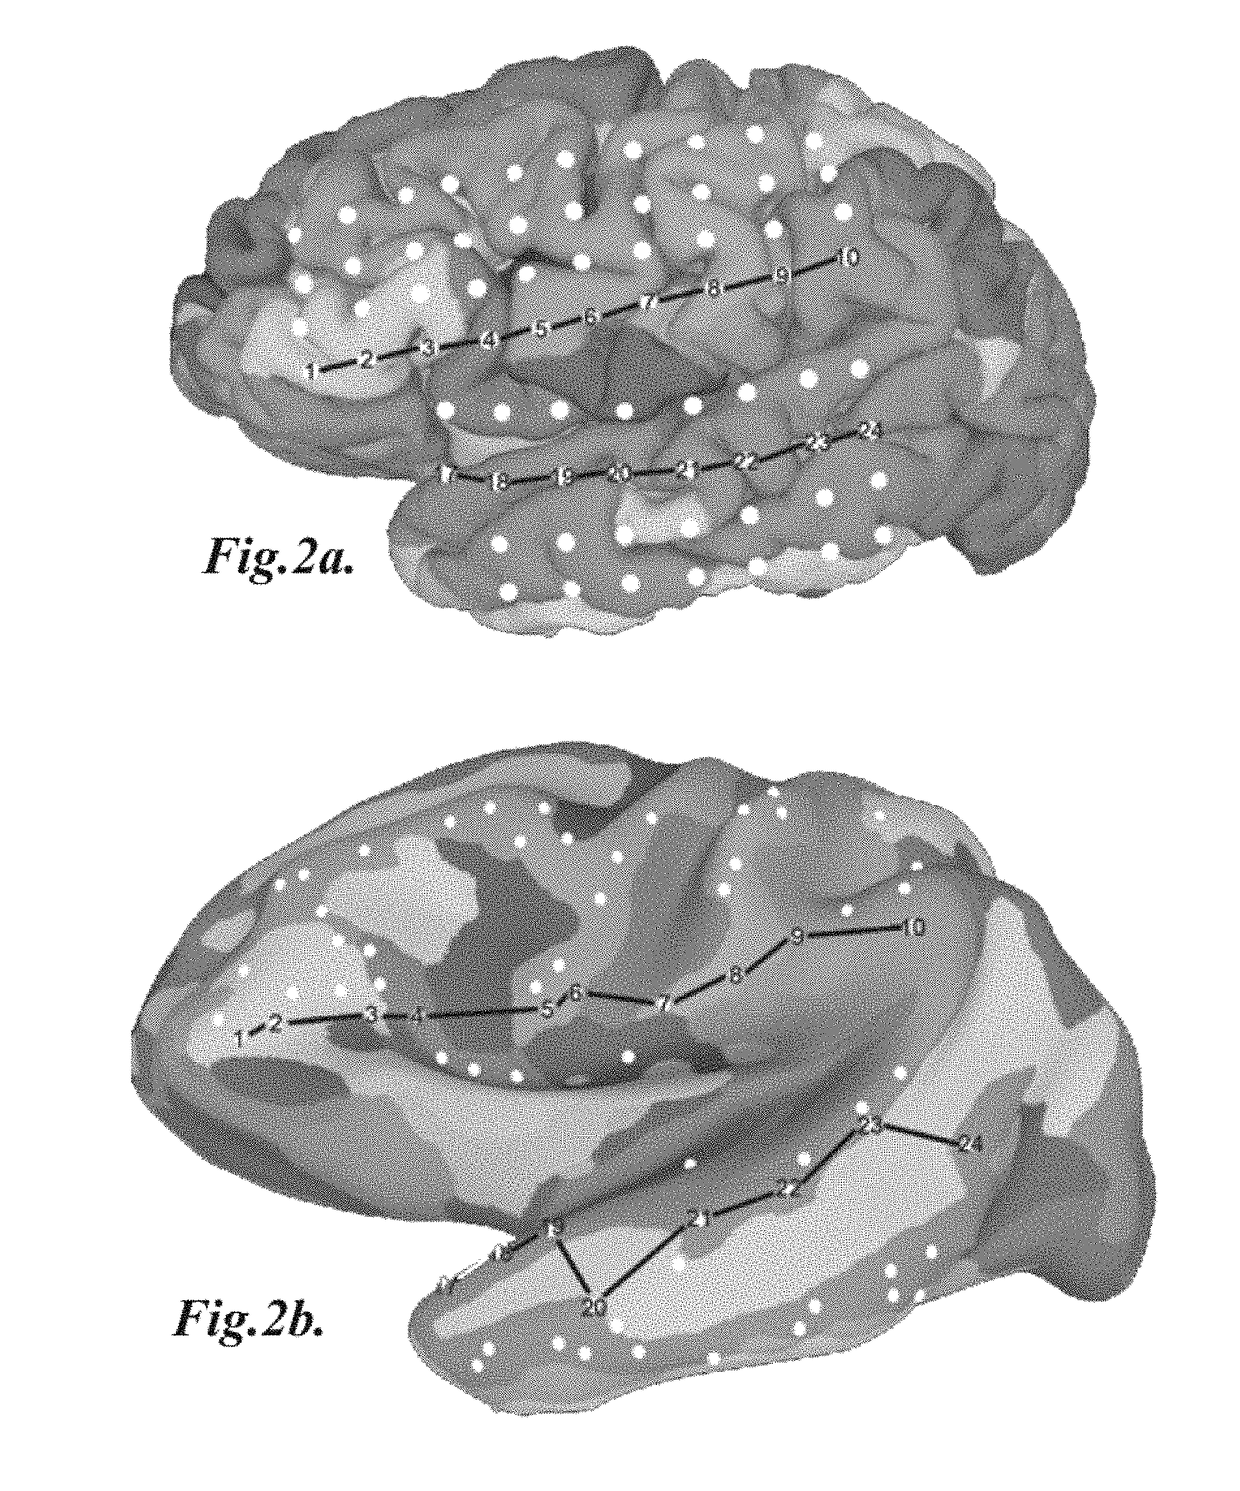 Subdural electrode localization and visualization using parcellated, manipulable cerebral mesh models